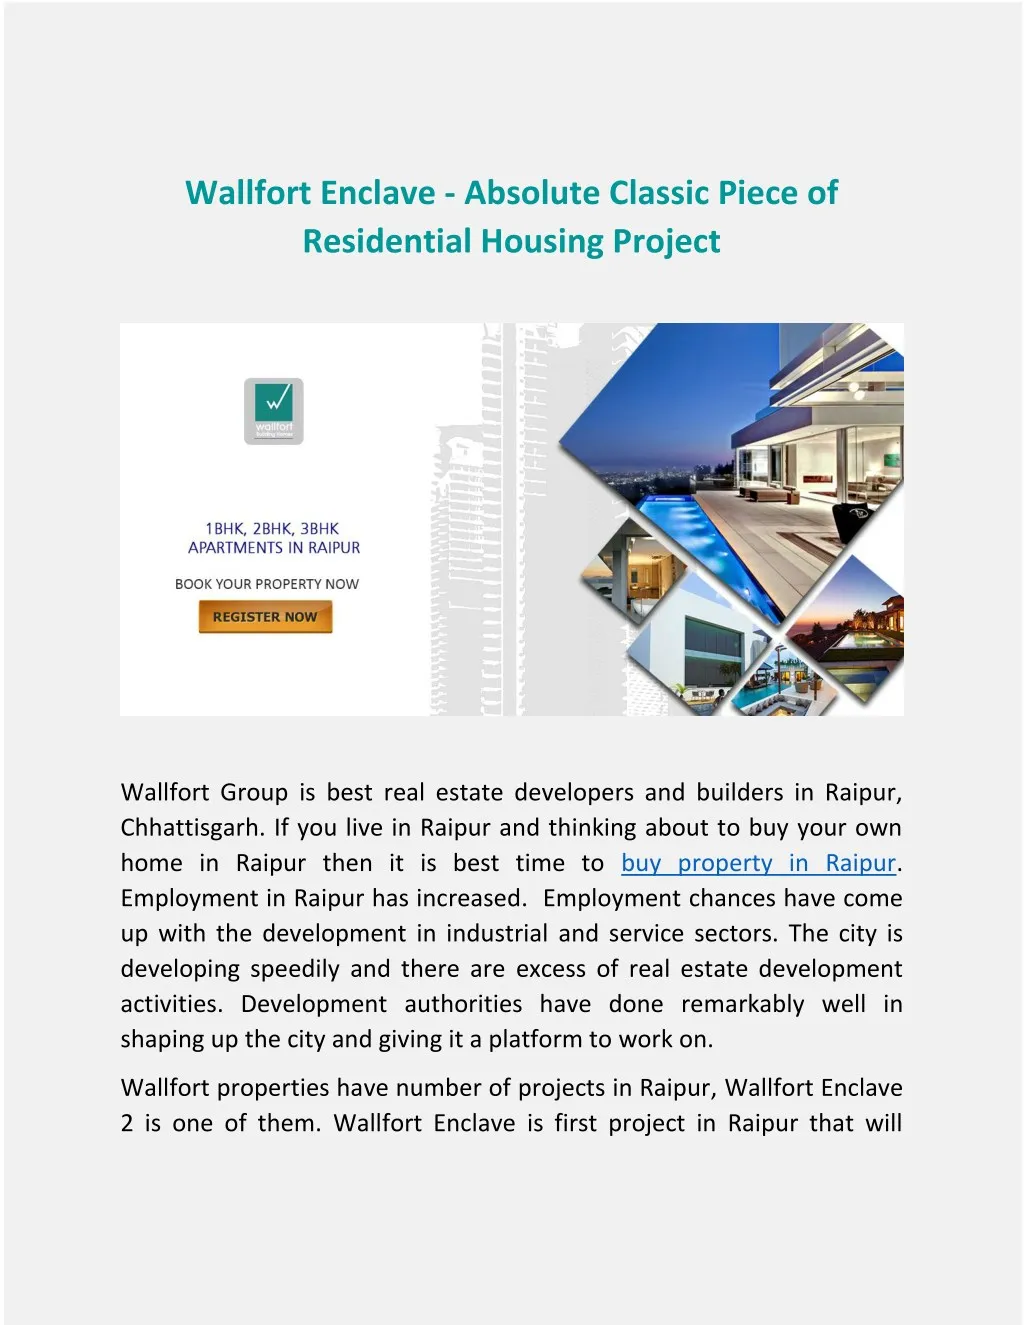 wallfort enclave absolute classic piece